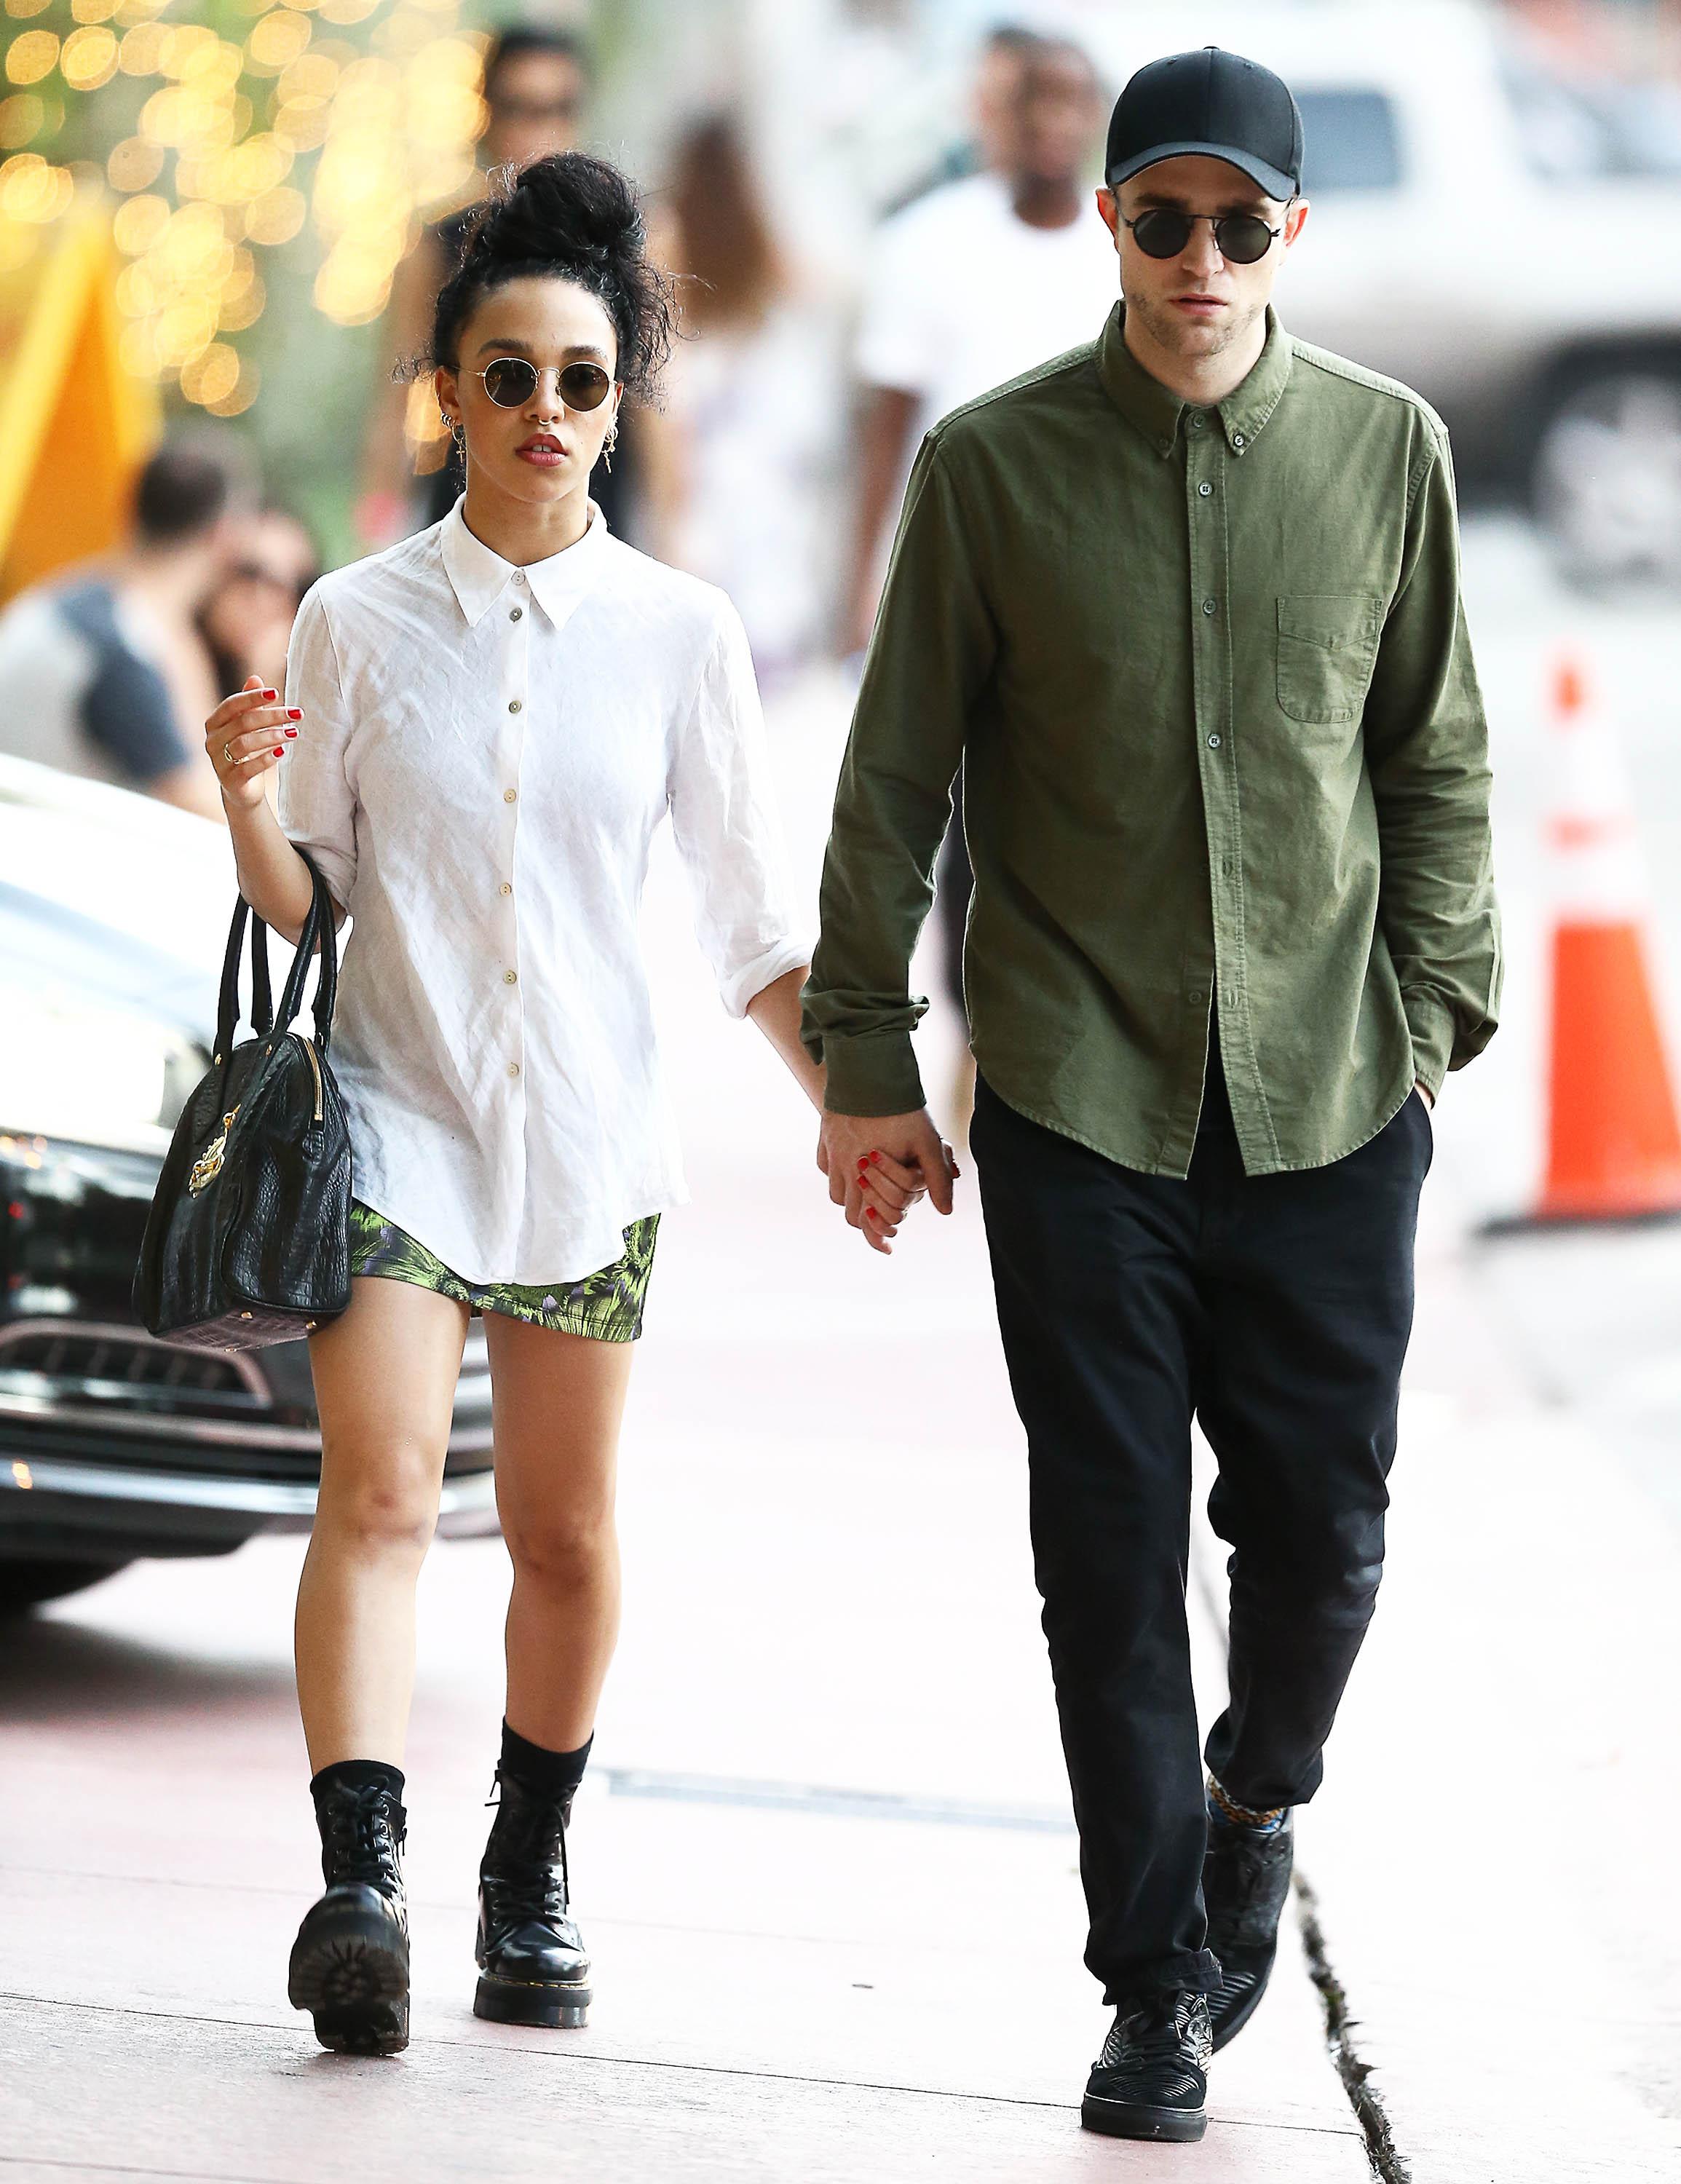 Robert Pattinson And Fka Twigs Engaged Details About The Ring Proposal Wedding Date And More